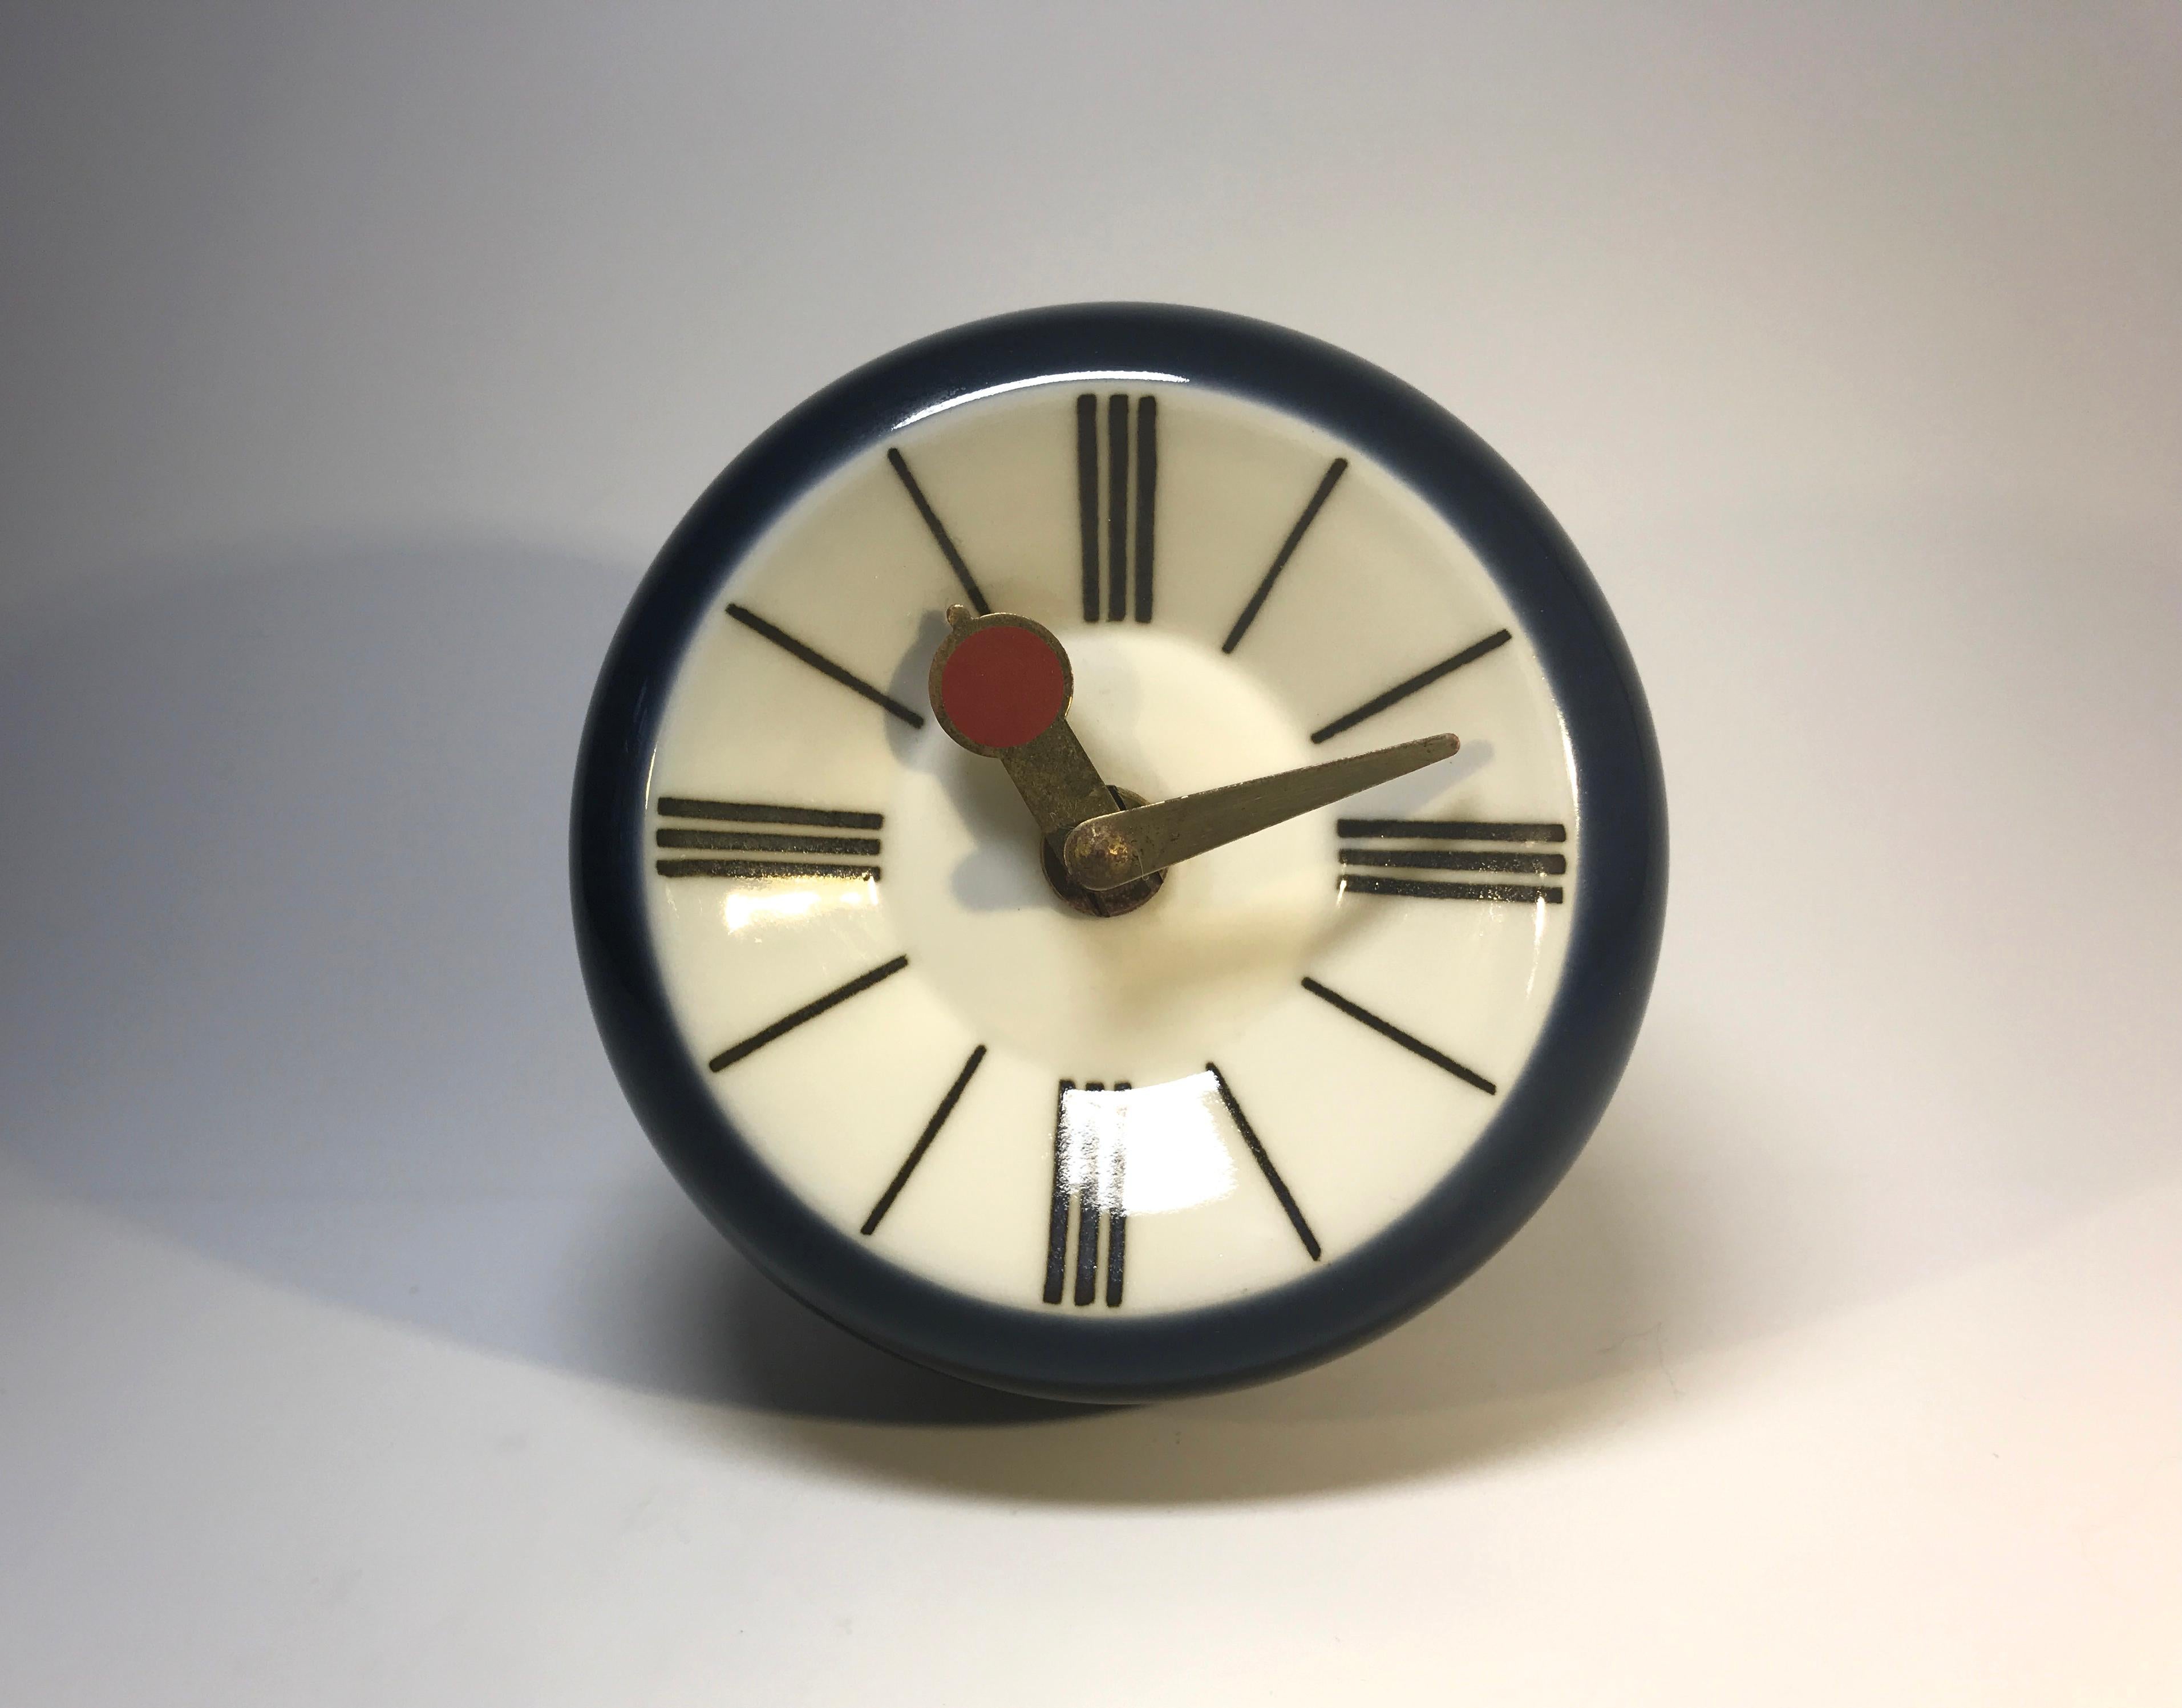 Superb design from the 1970s by Snorre Læssøe Stephensen for Royal Copenhagen. Navy blue porcelain battery operated wall clock. Hands are brass with red enamel to the hour hand.
Fully working battery mechanism.
Danish understated design at its